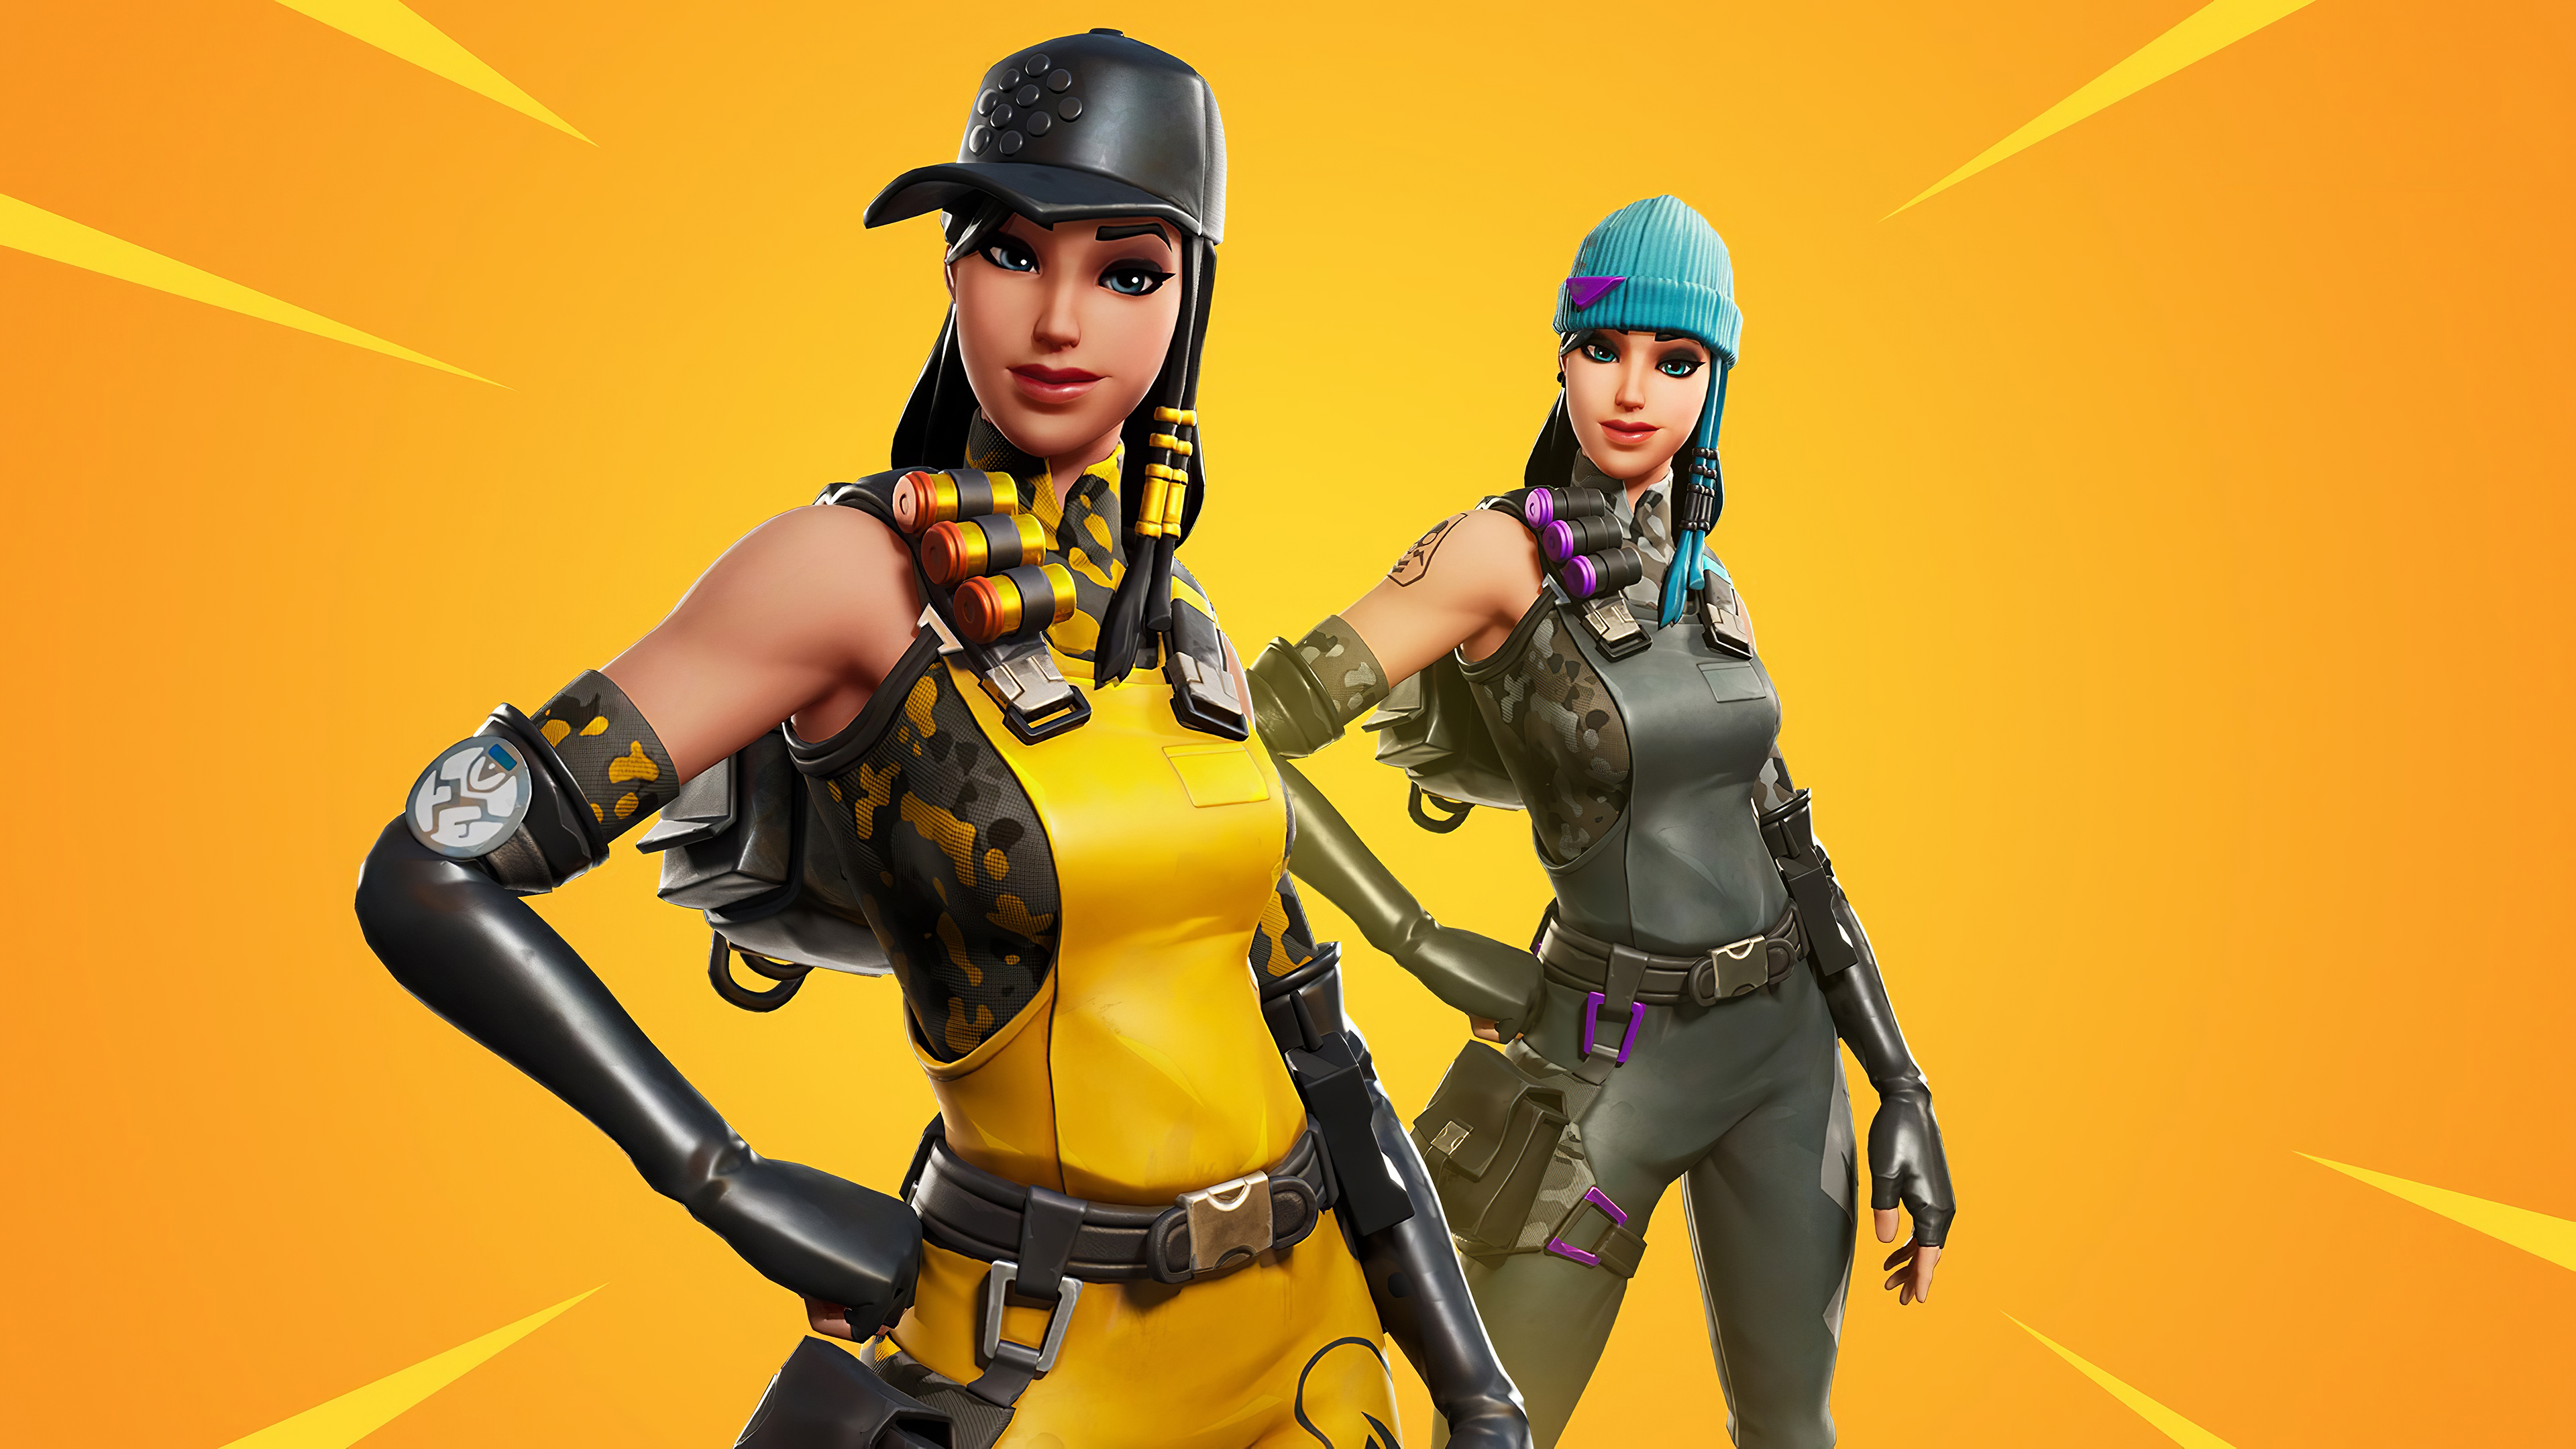 Outcast Skin In Fortnite 2 Wallpaper, HD Games 4K Wallpapers, Images